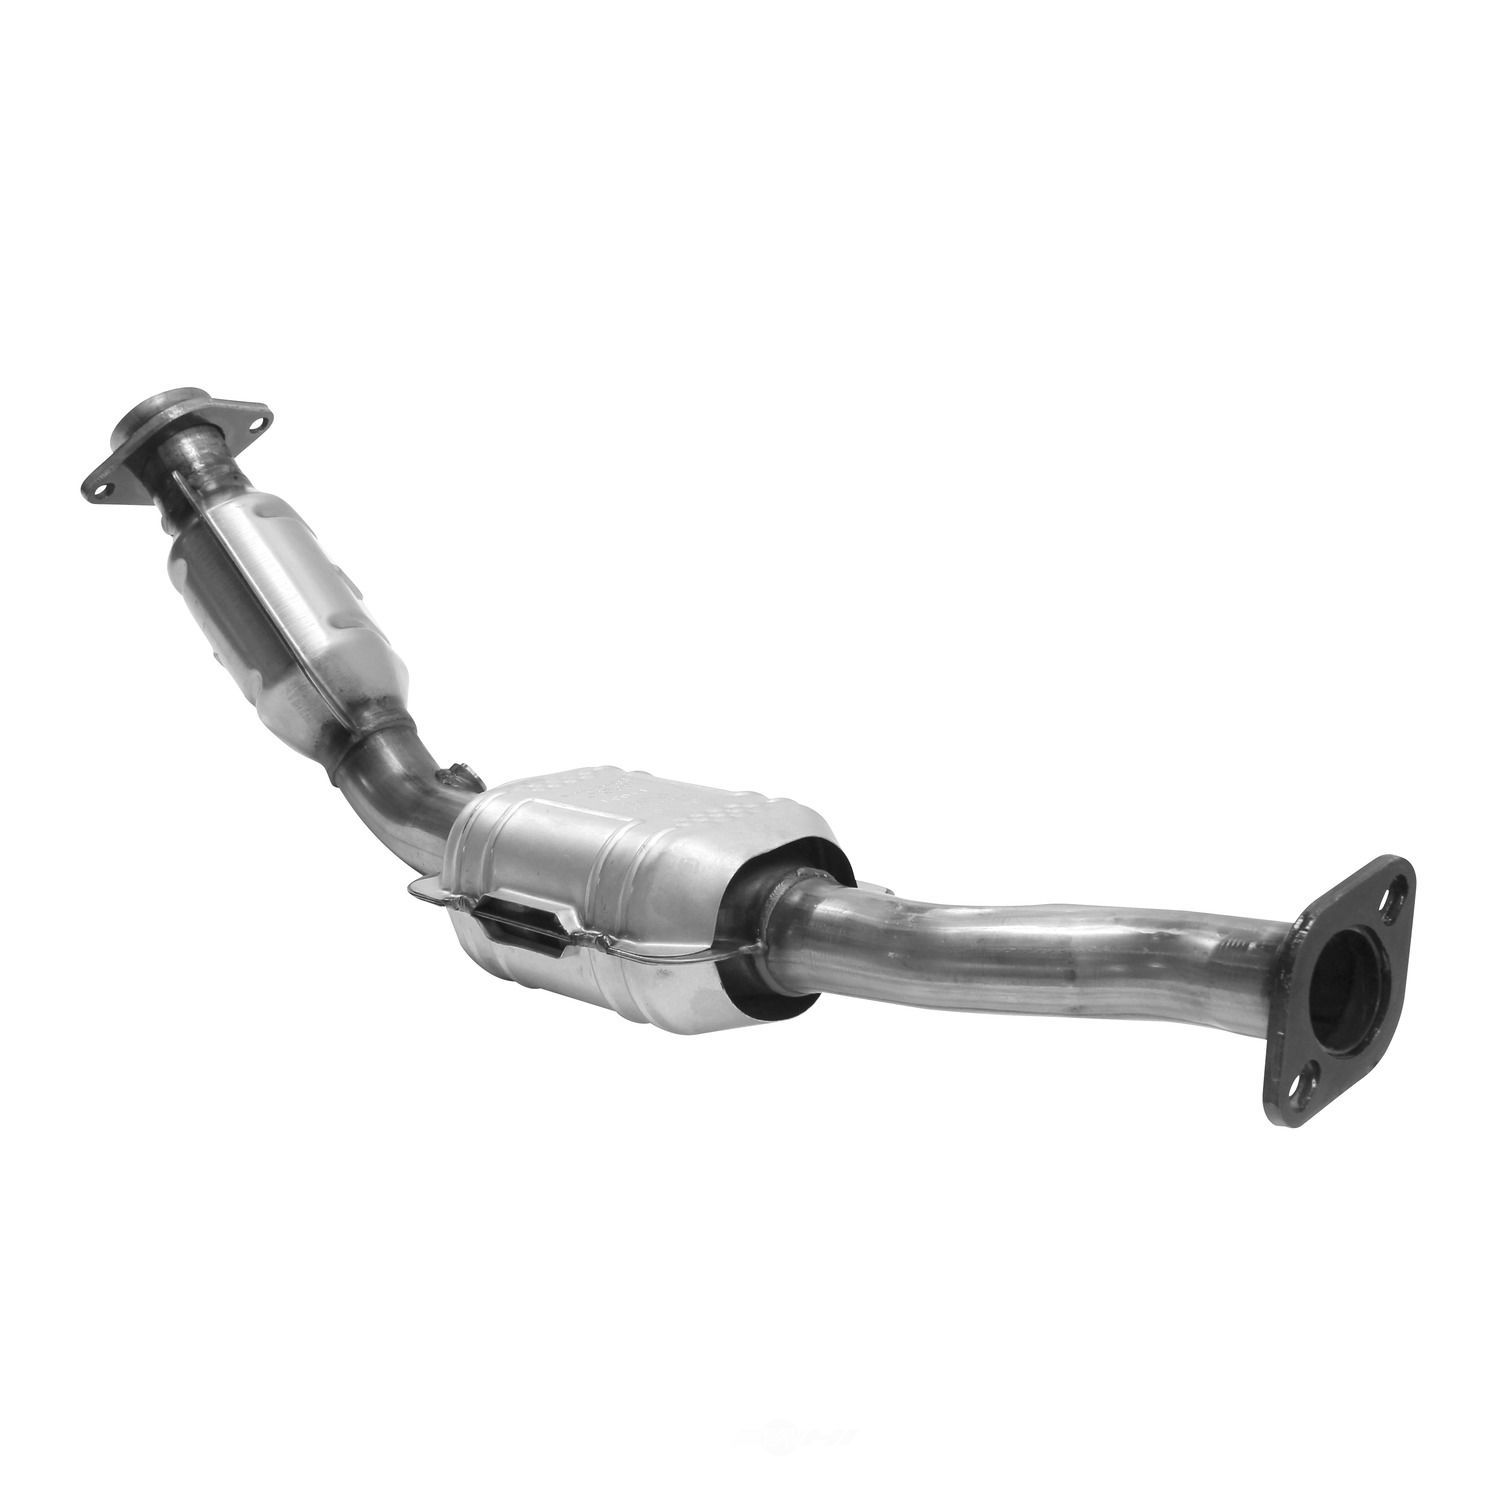 AP EXHAUST W/FEDERAL CONVERTER - Direct Fit Converter (Left) - APF 642179